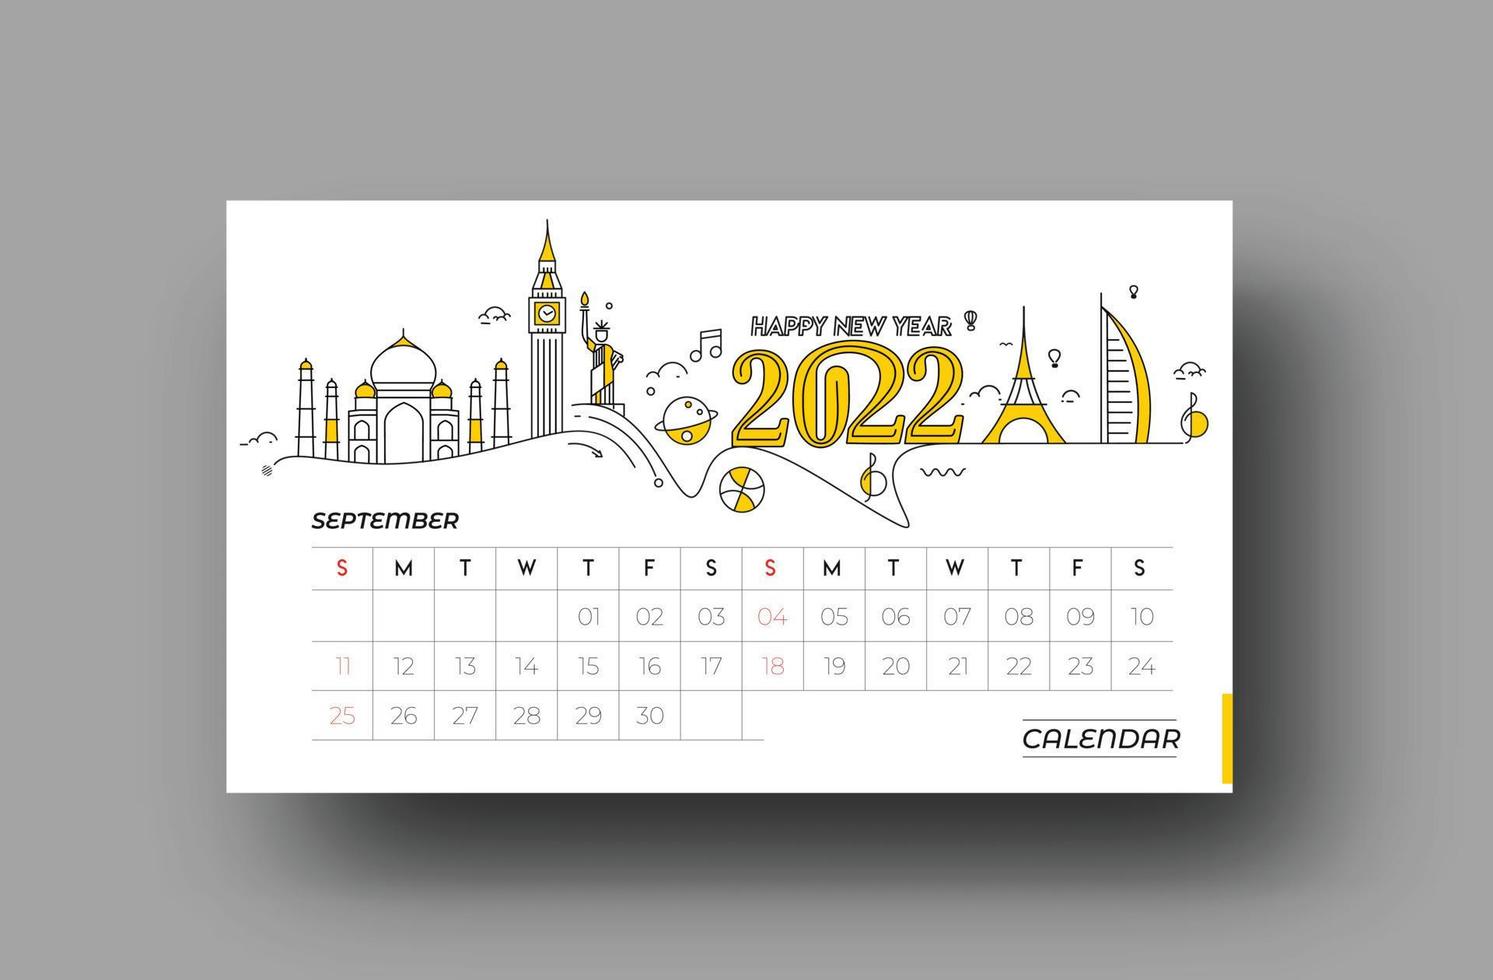 Happy new year 2022 February Calendar - New Year Holiday design elements for holiday cards, calendar banner poster for decorations, Vector Illustration Background.